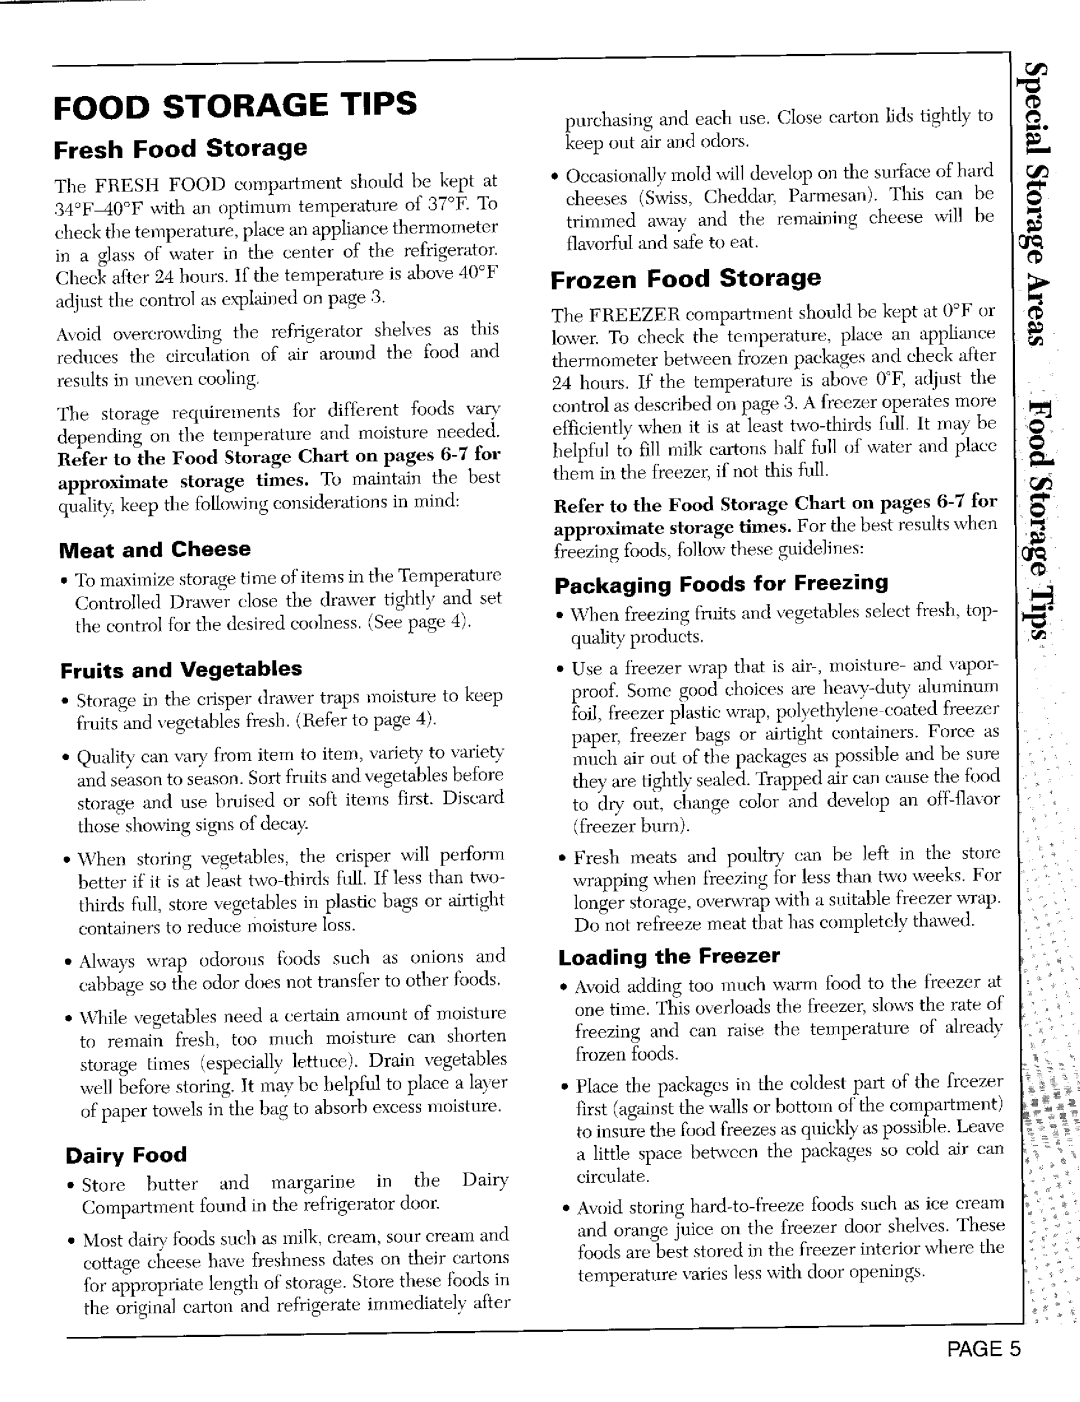 Maytag RST2200 Food Storage Tips, Frozen Food Storage, Fresh Food Storage, Meat and Cheese, Fruits and VegetabLes, Foods 